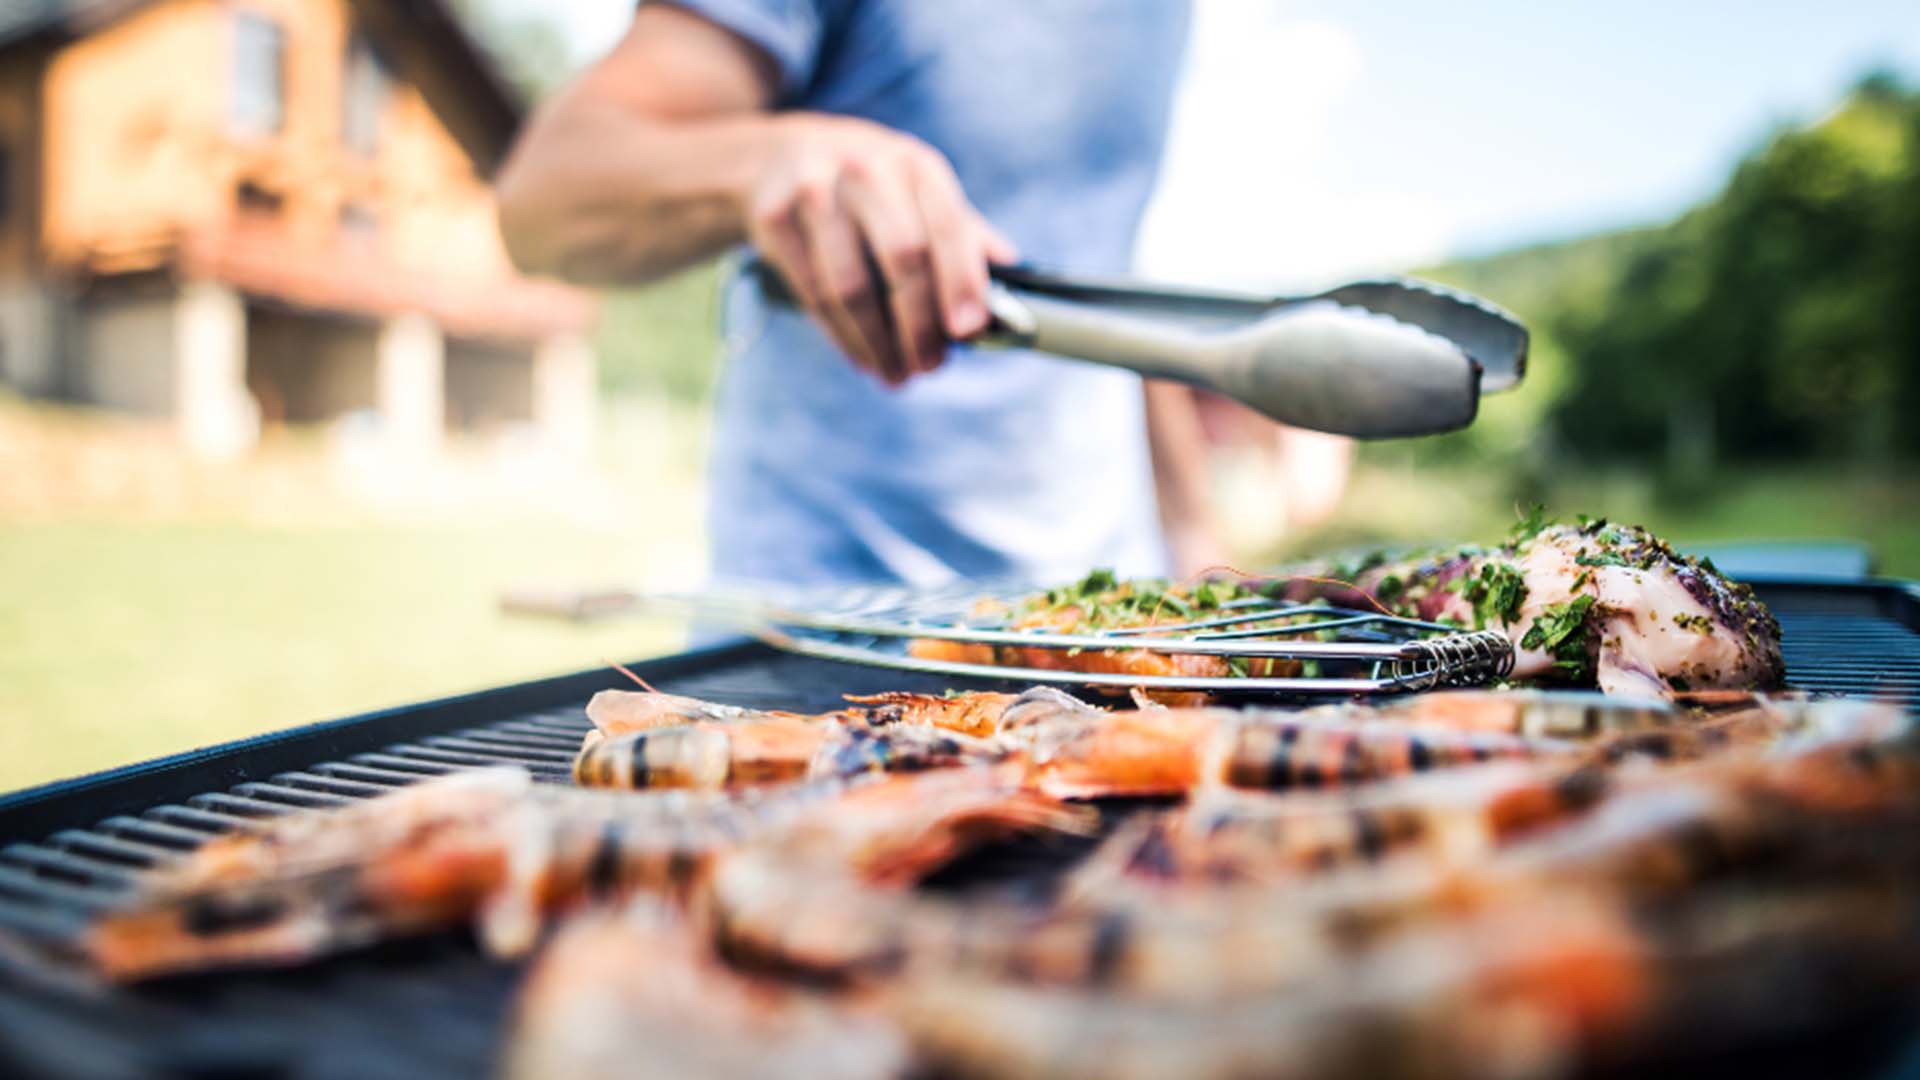 Top Tips for Perfectly Grilled Meals This Summer